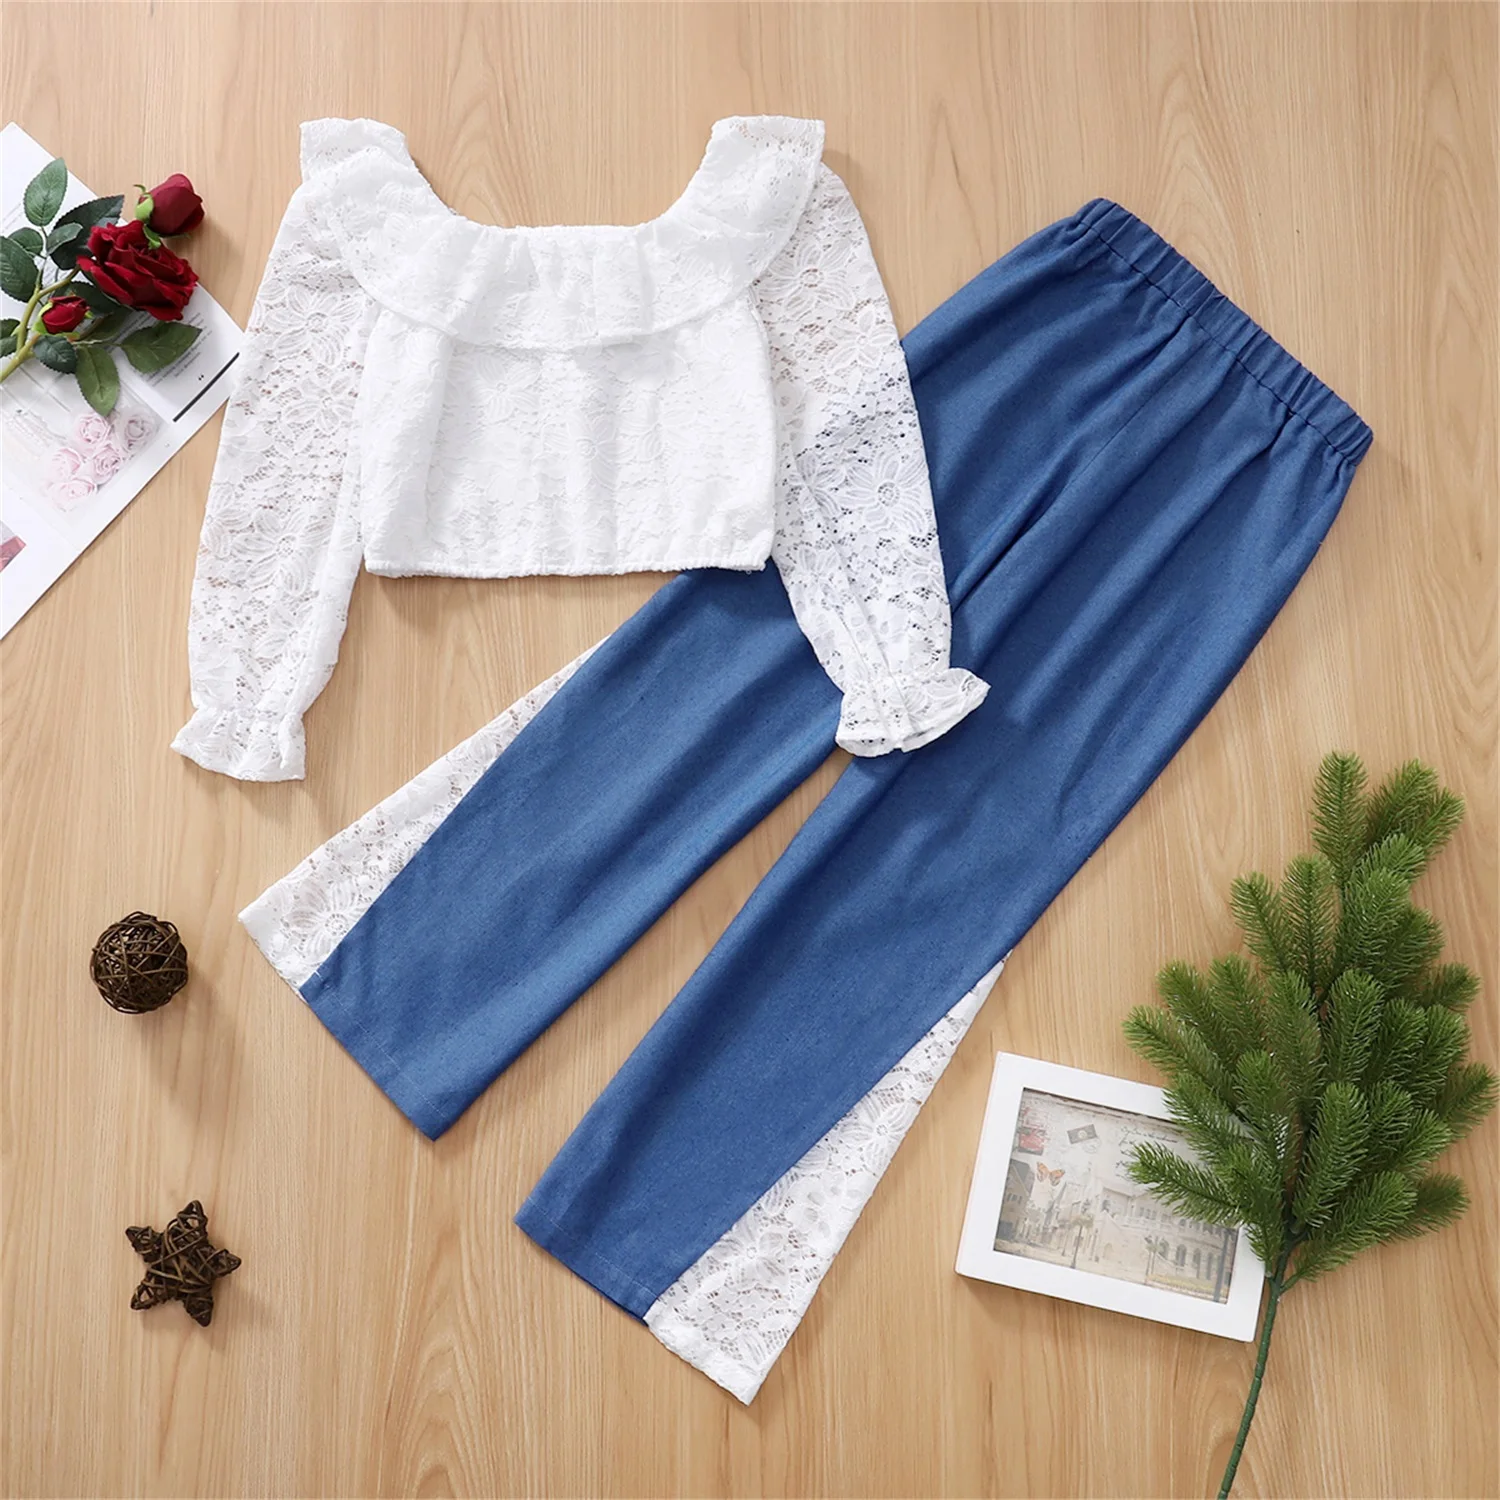 PatPat 2-piece Kid Girl Doll Collar Long-sleeve White Lace Top and Denim Splice Pants Set